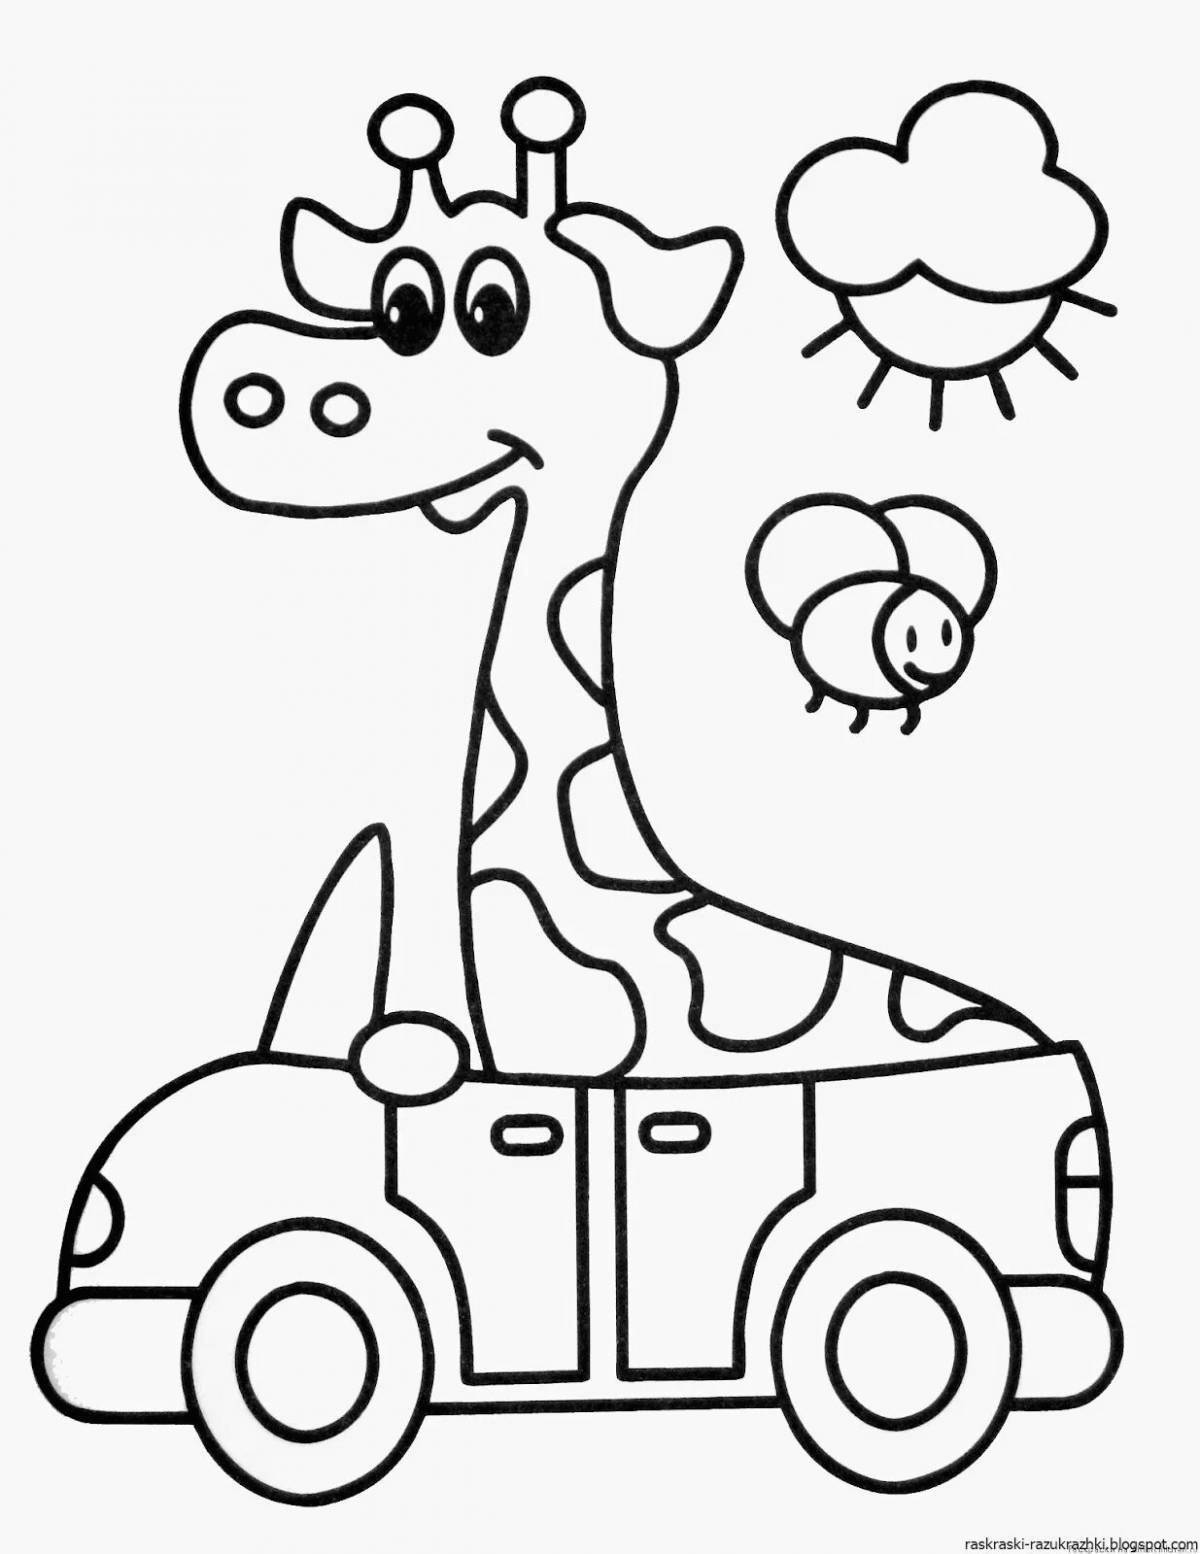 Outstanding cars coloring book for 4 year olds